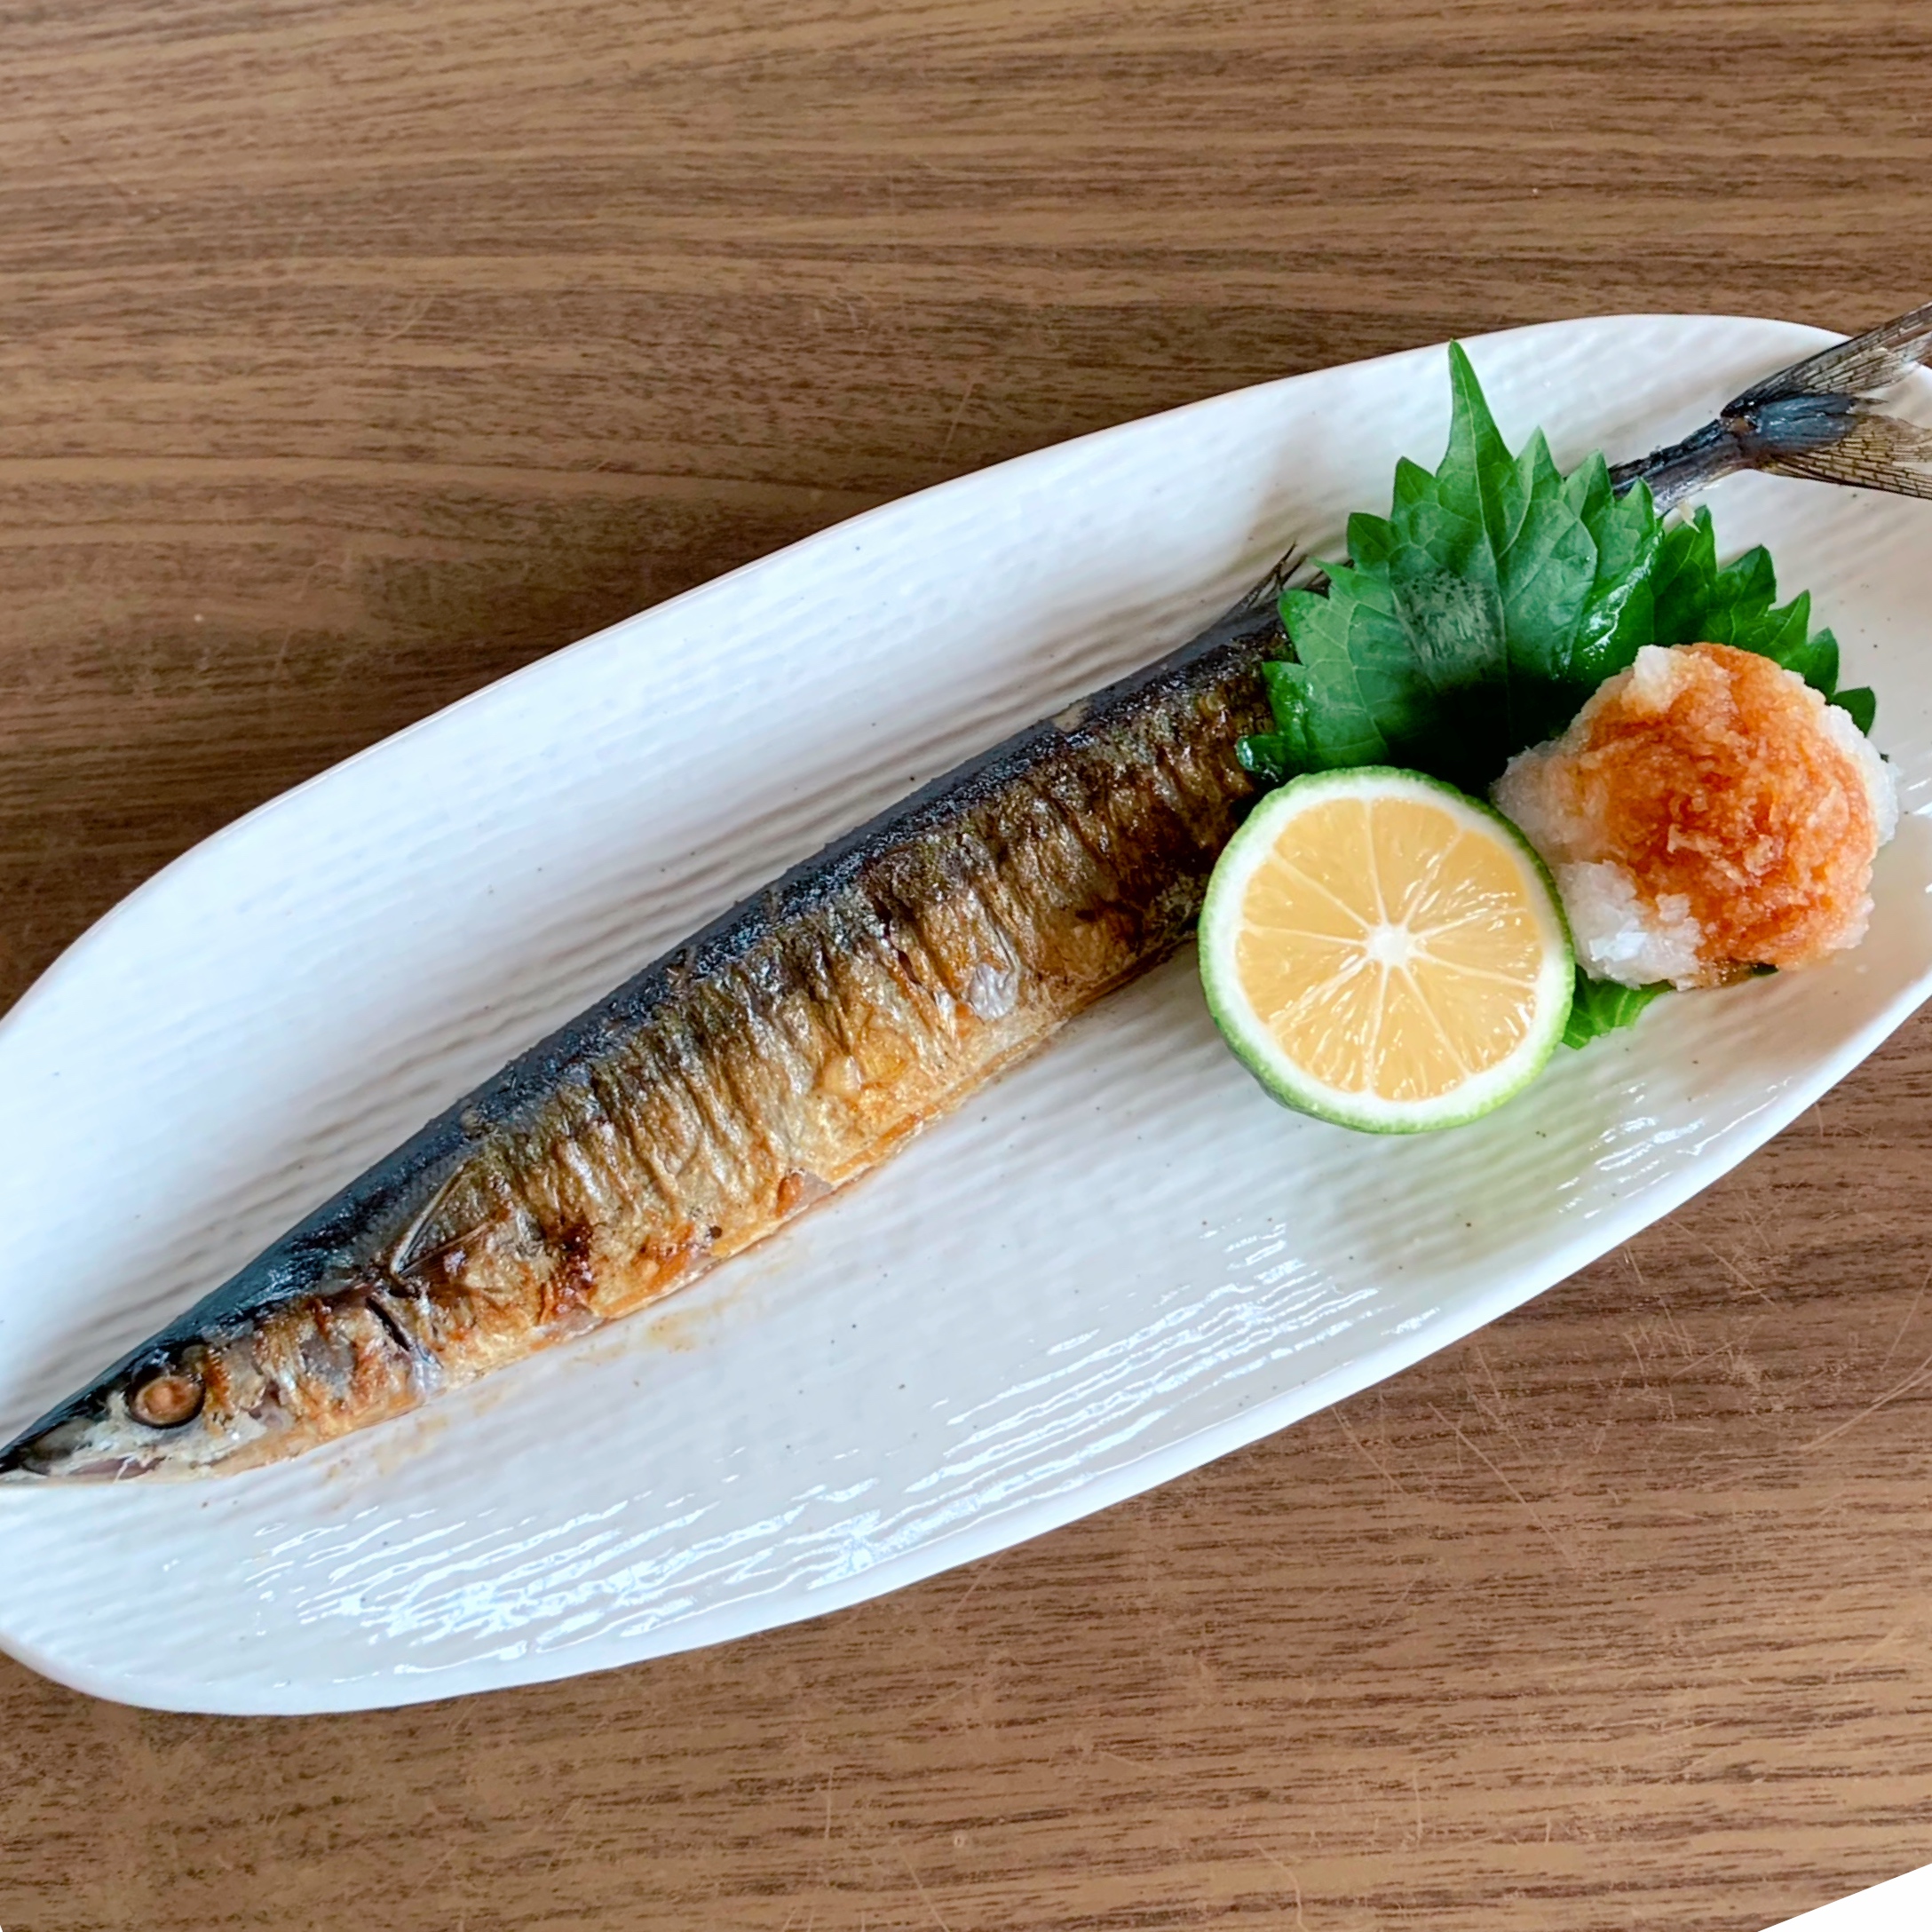 Saury is rubbed with salt and grilled fragrantly.